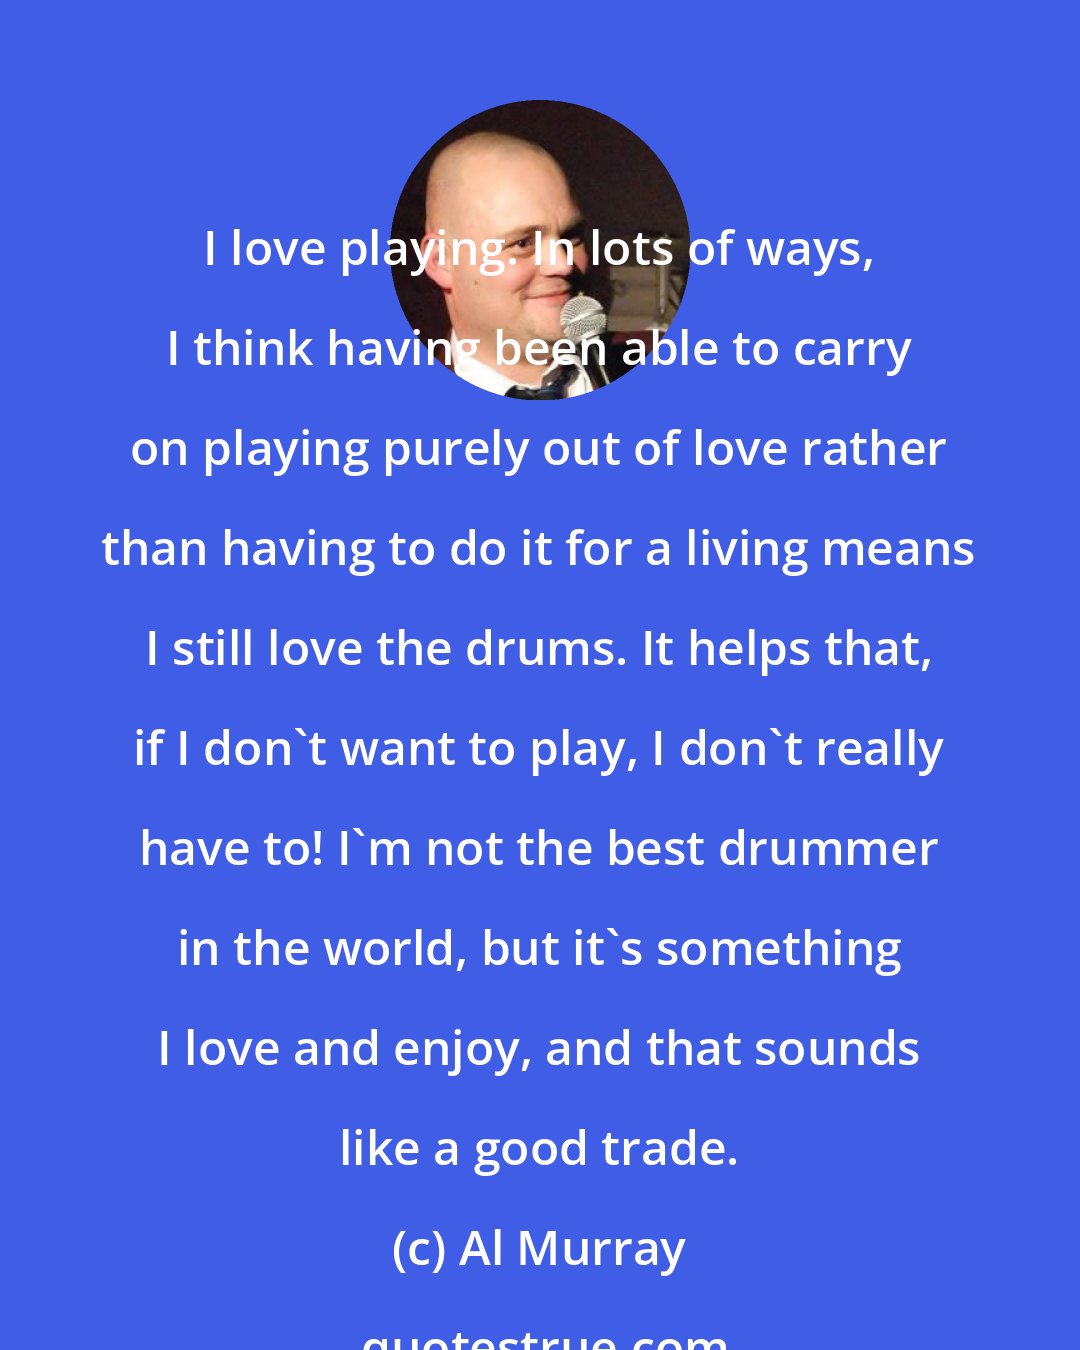 Al Murray: I love playing. In lots of ways, I think having been able to carry on playing purely out of love rather than having to do it for a living means I still love the drums. It helps that, if I don't want to play, I don't really have to! I'm not the best drummer in the world, but it's something I love and enjoy, and that sounds like a good trade.